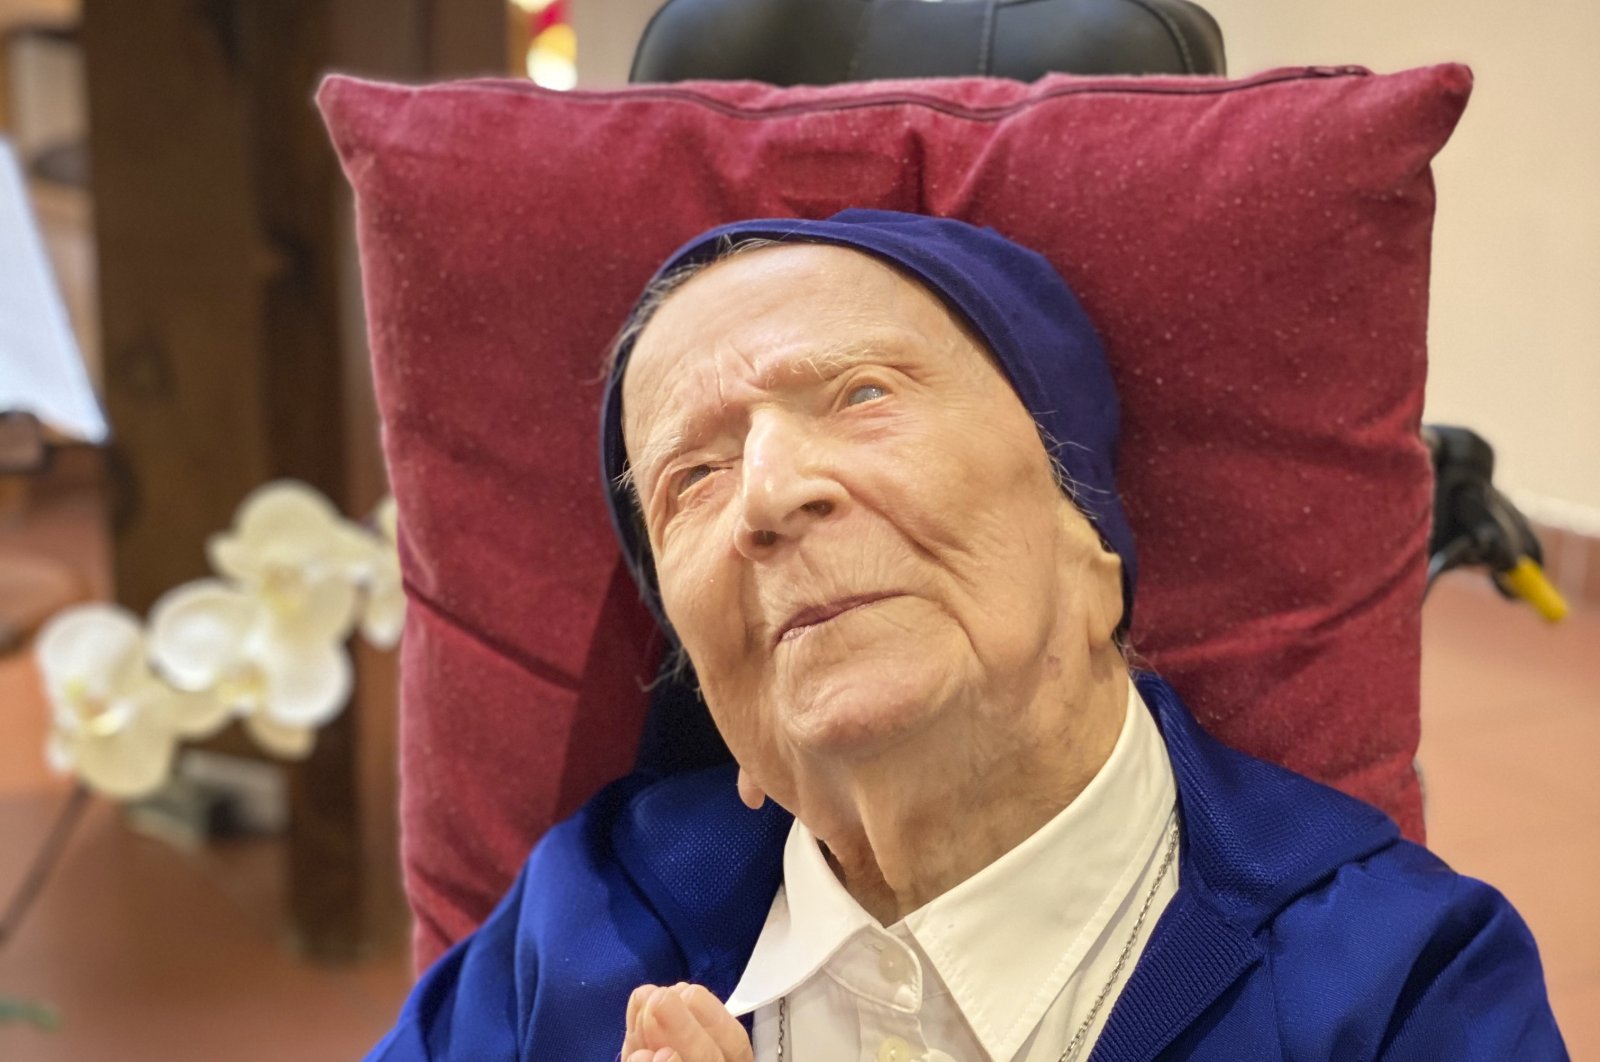 Sister Andre, born Lucile Randon, folds her hands at mass at the chapel of her care home in a photo provided by the Sainte-Catherine Laboure care home communications manager, Toulon, southern France, Feb. 11, 2021. (Sainte-Catherine Laboure care home / David Tavella via AP)